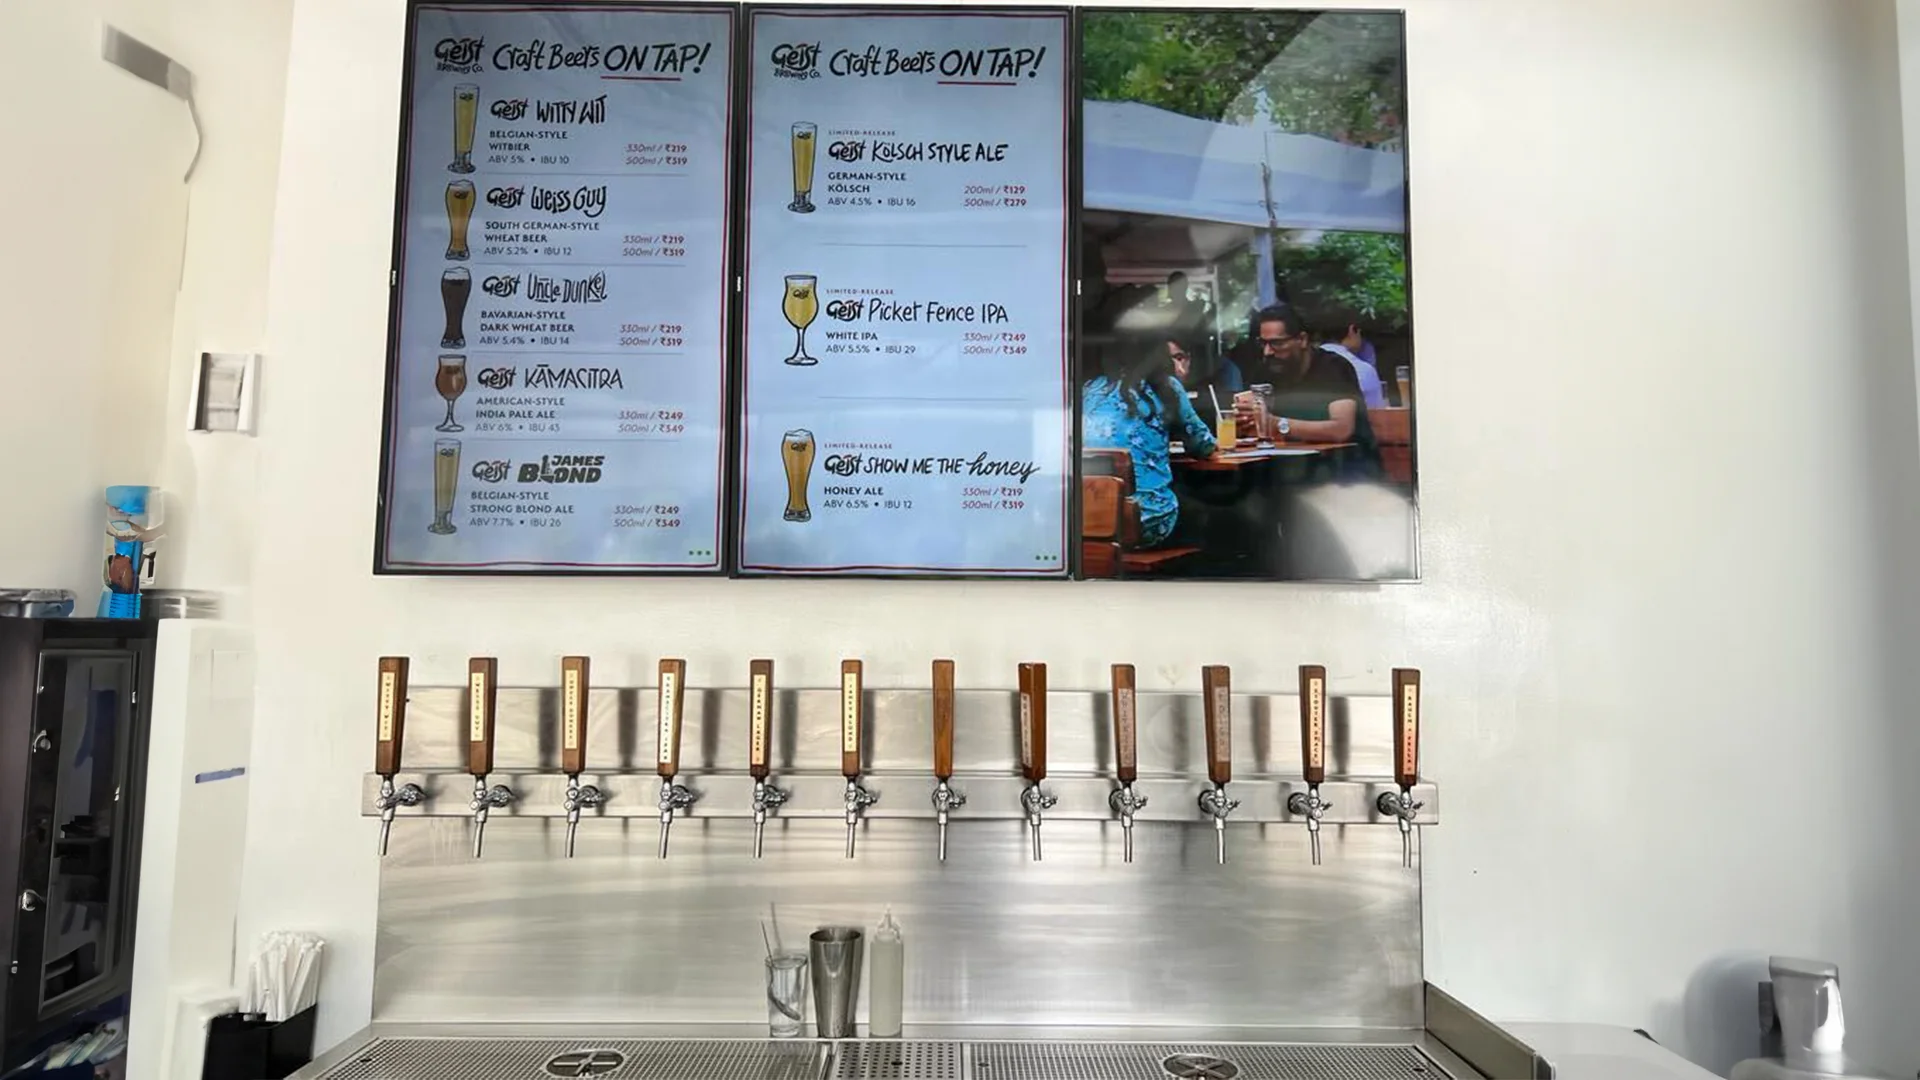 Geist Brewing Co. using Pickcel digital signage for content showcase.